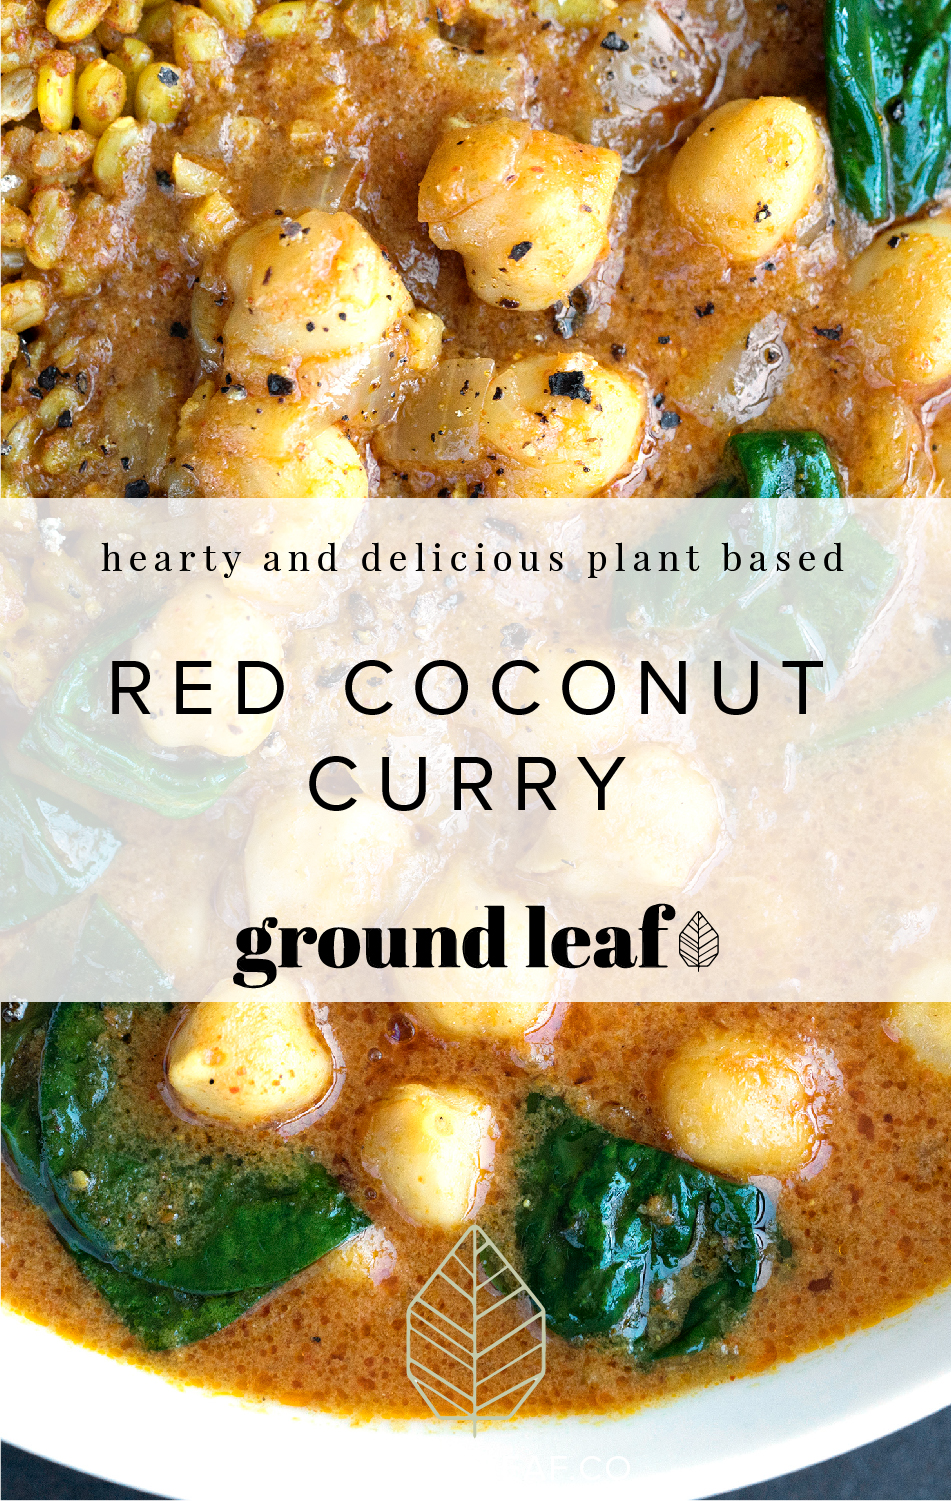 Learn how to make a hearty and delicious red coconut curry soup in your instant pot!